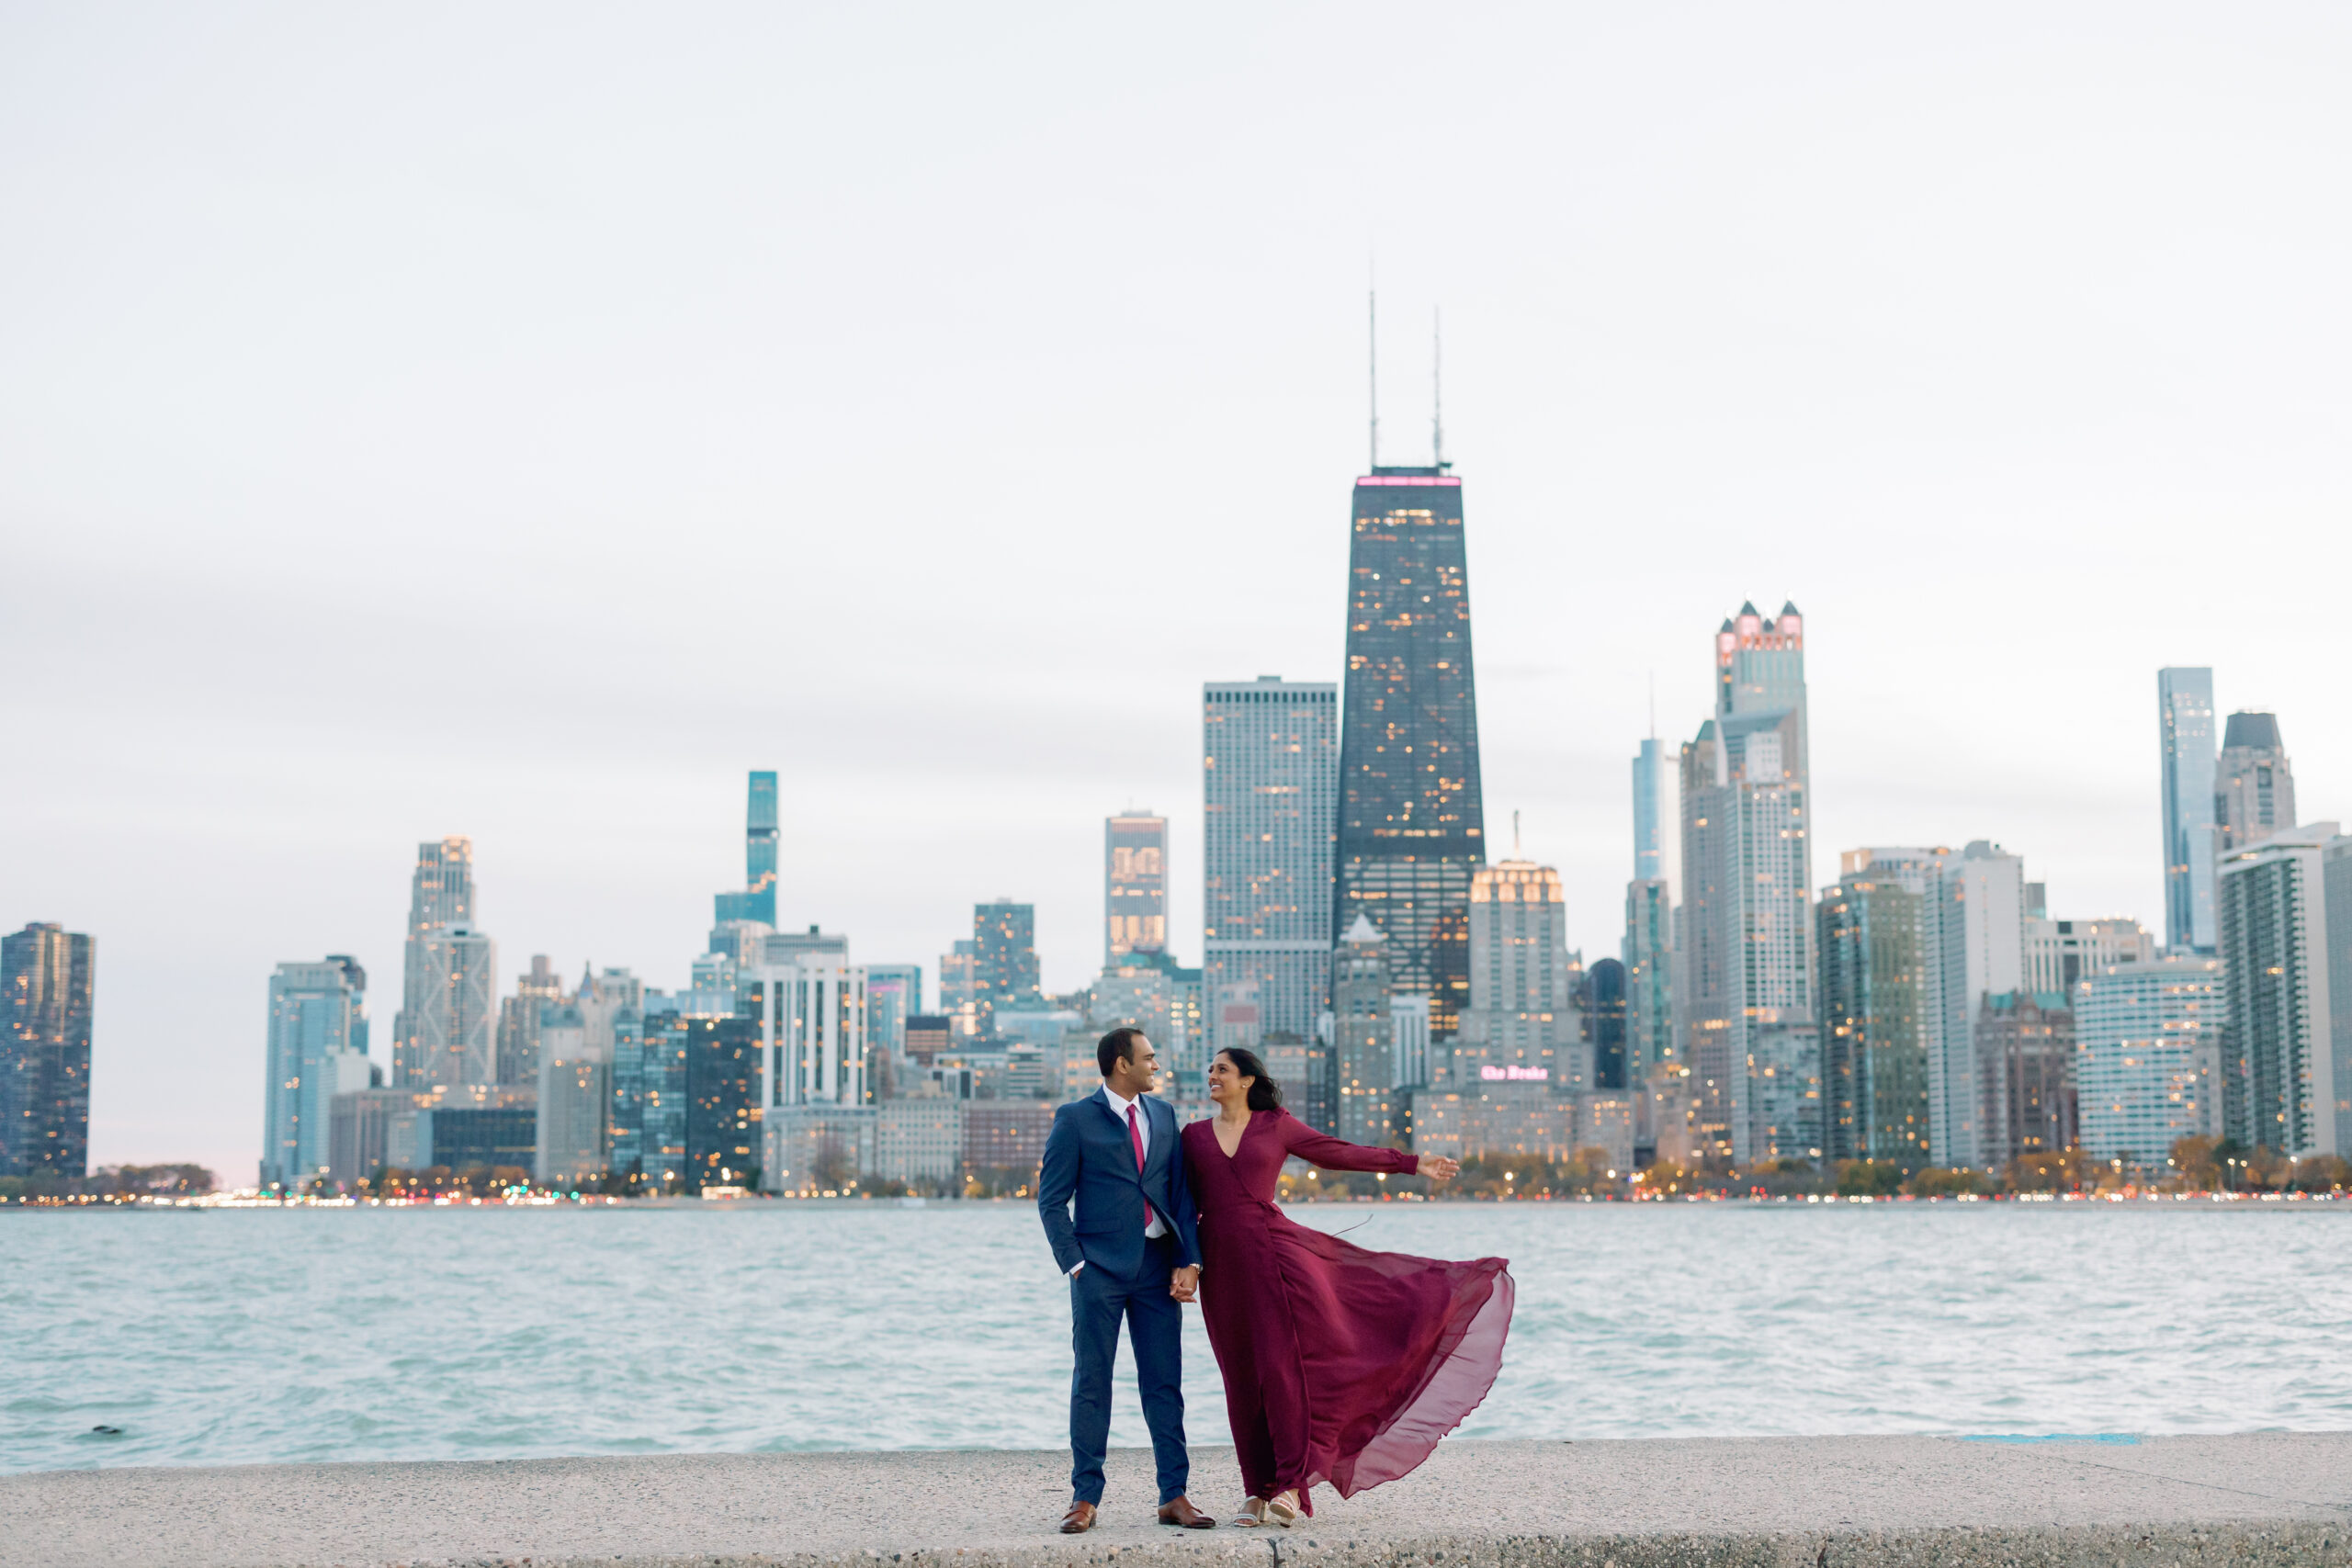 An engagement photo taken in front of the Chicago skyline at North Avenue Beach at sunset.